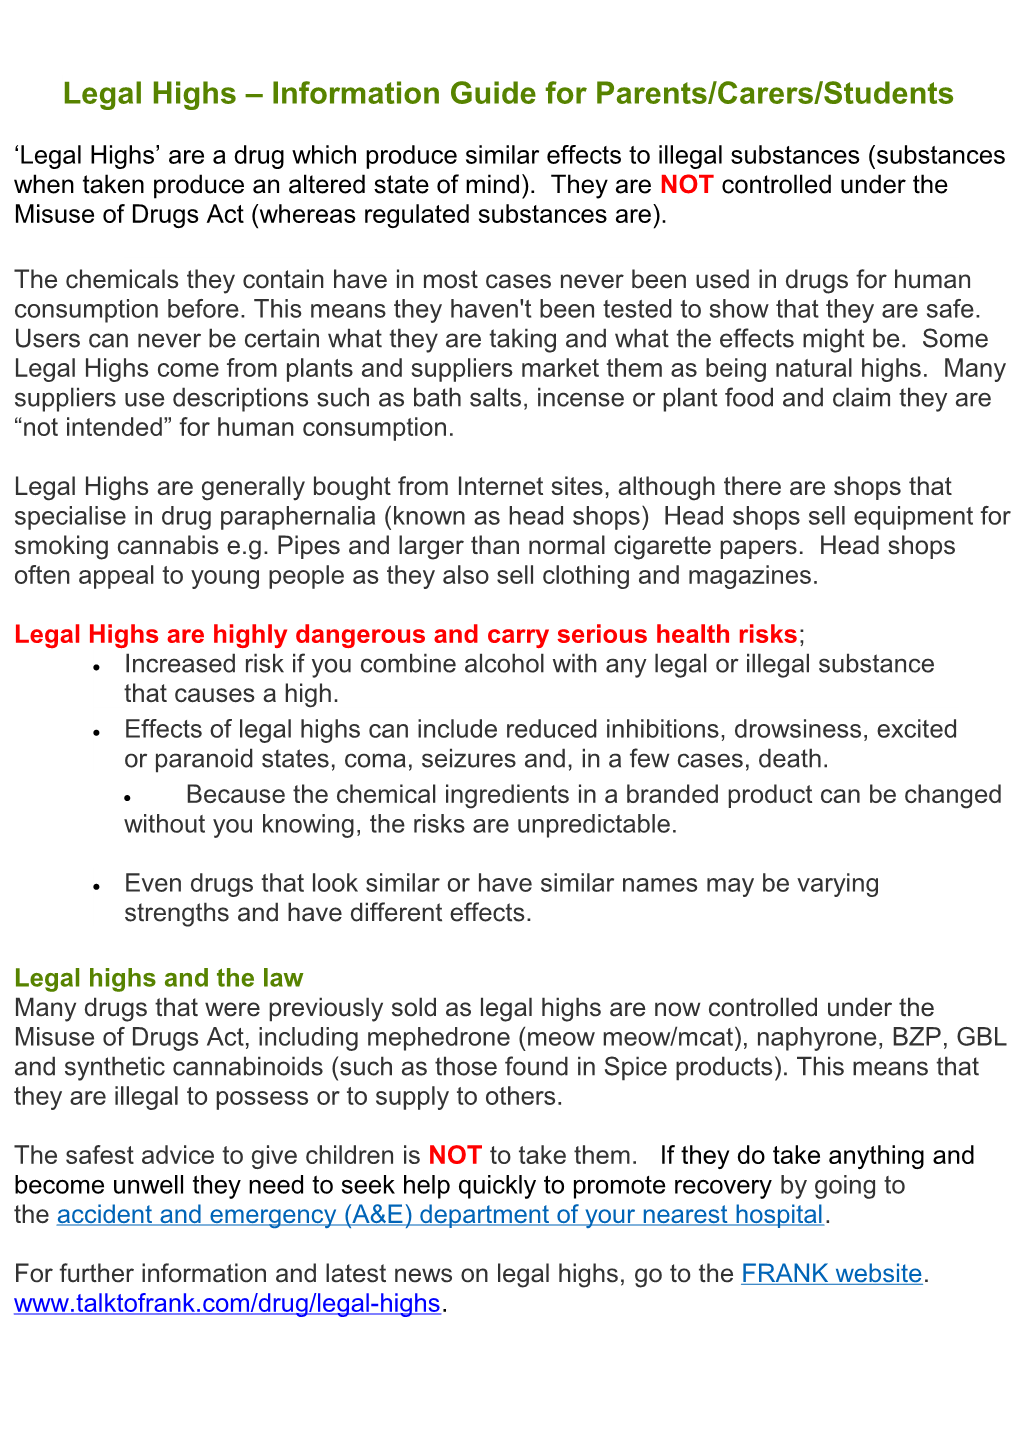 Legal Highs Information Guide for Parents/Carers/Students